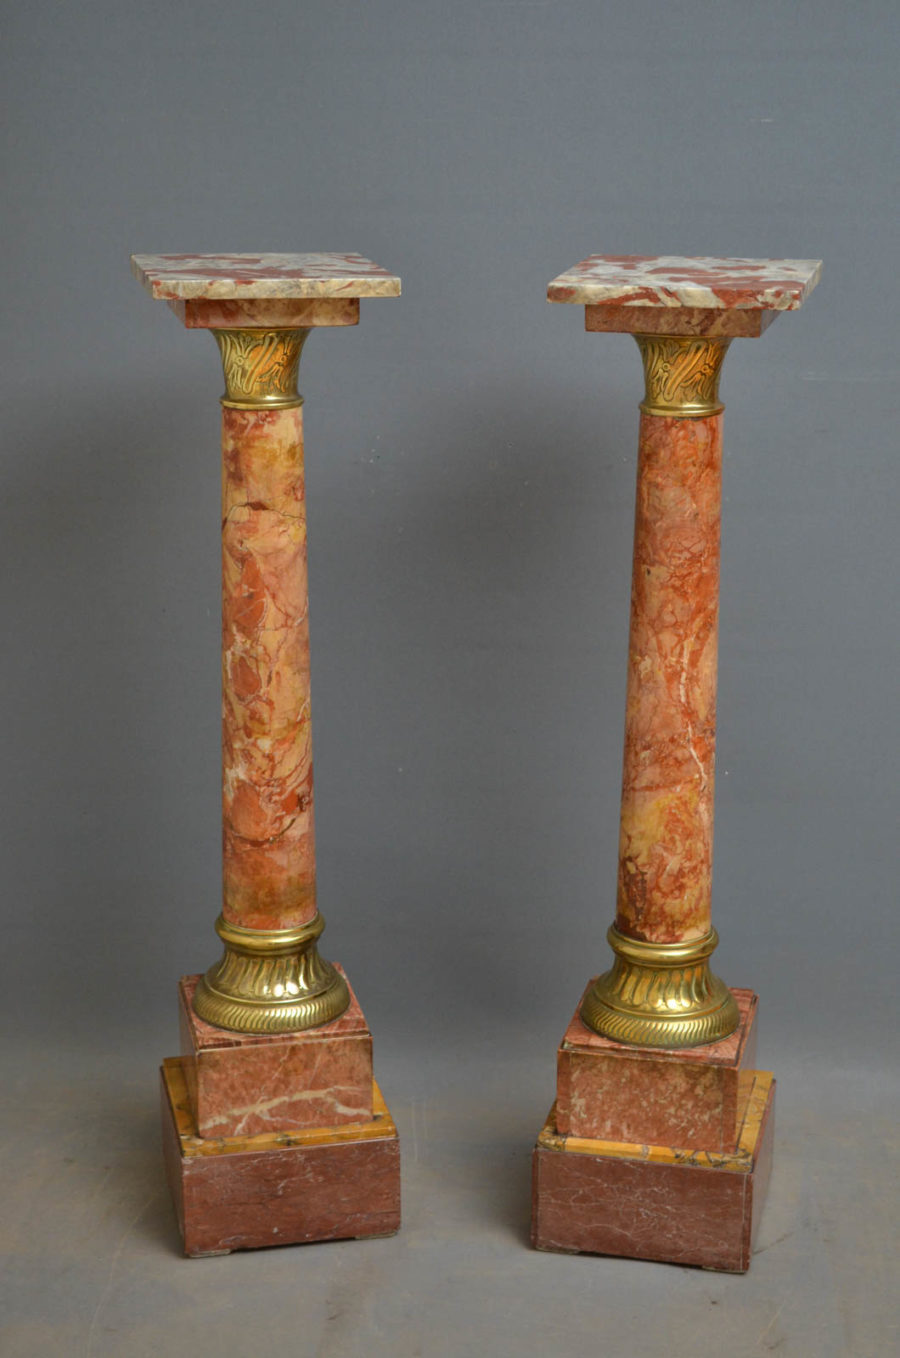 Victorian Pair of Marble Columns